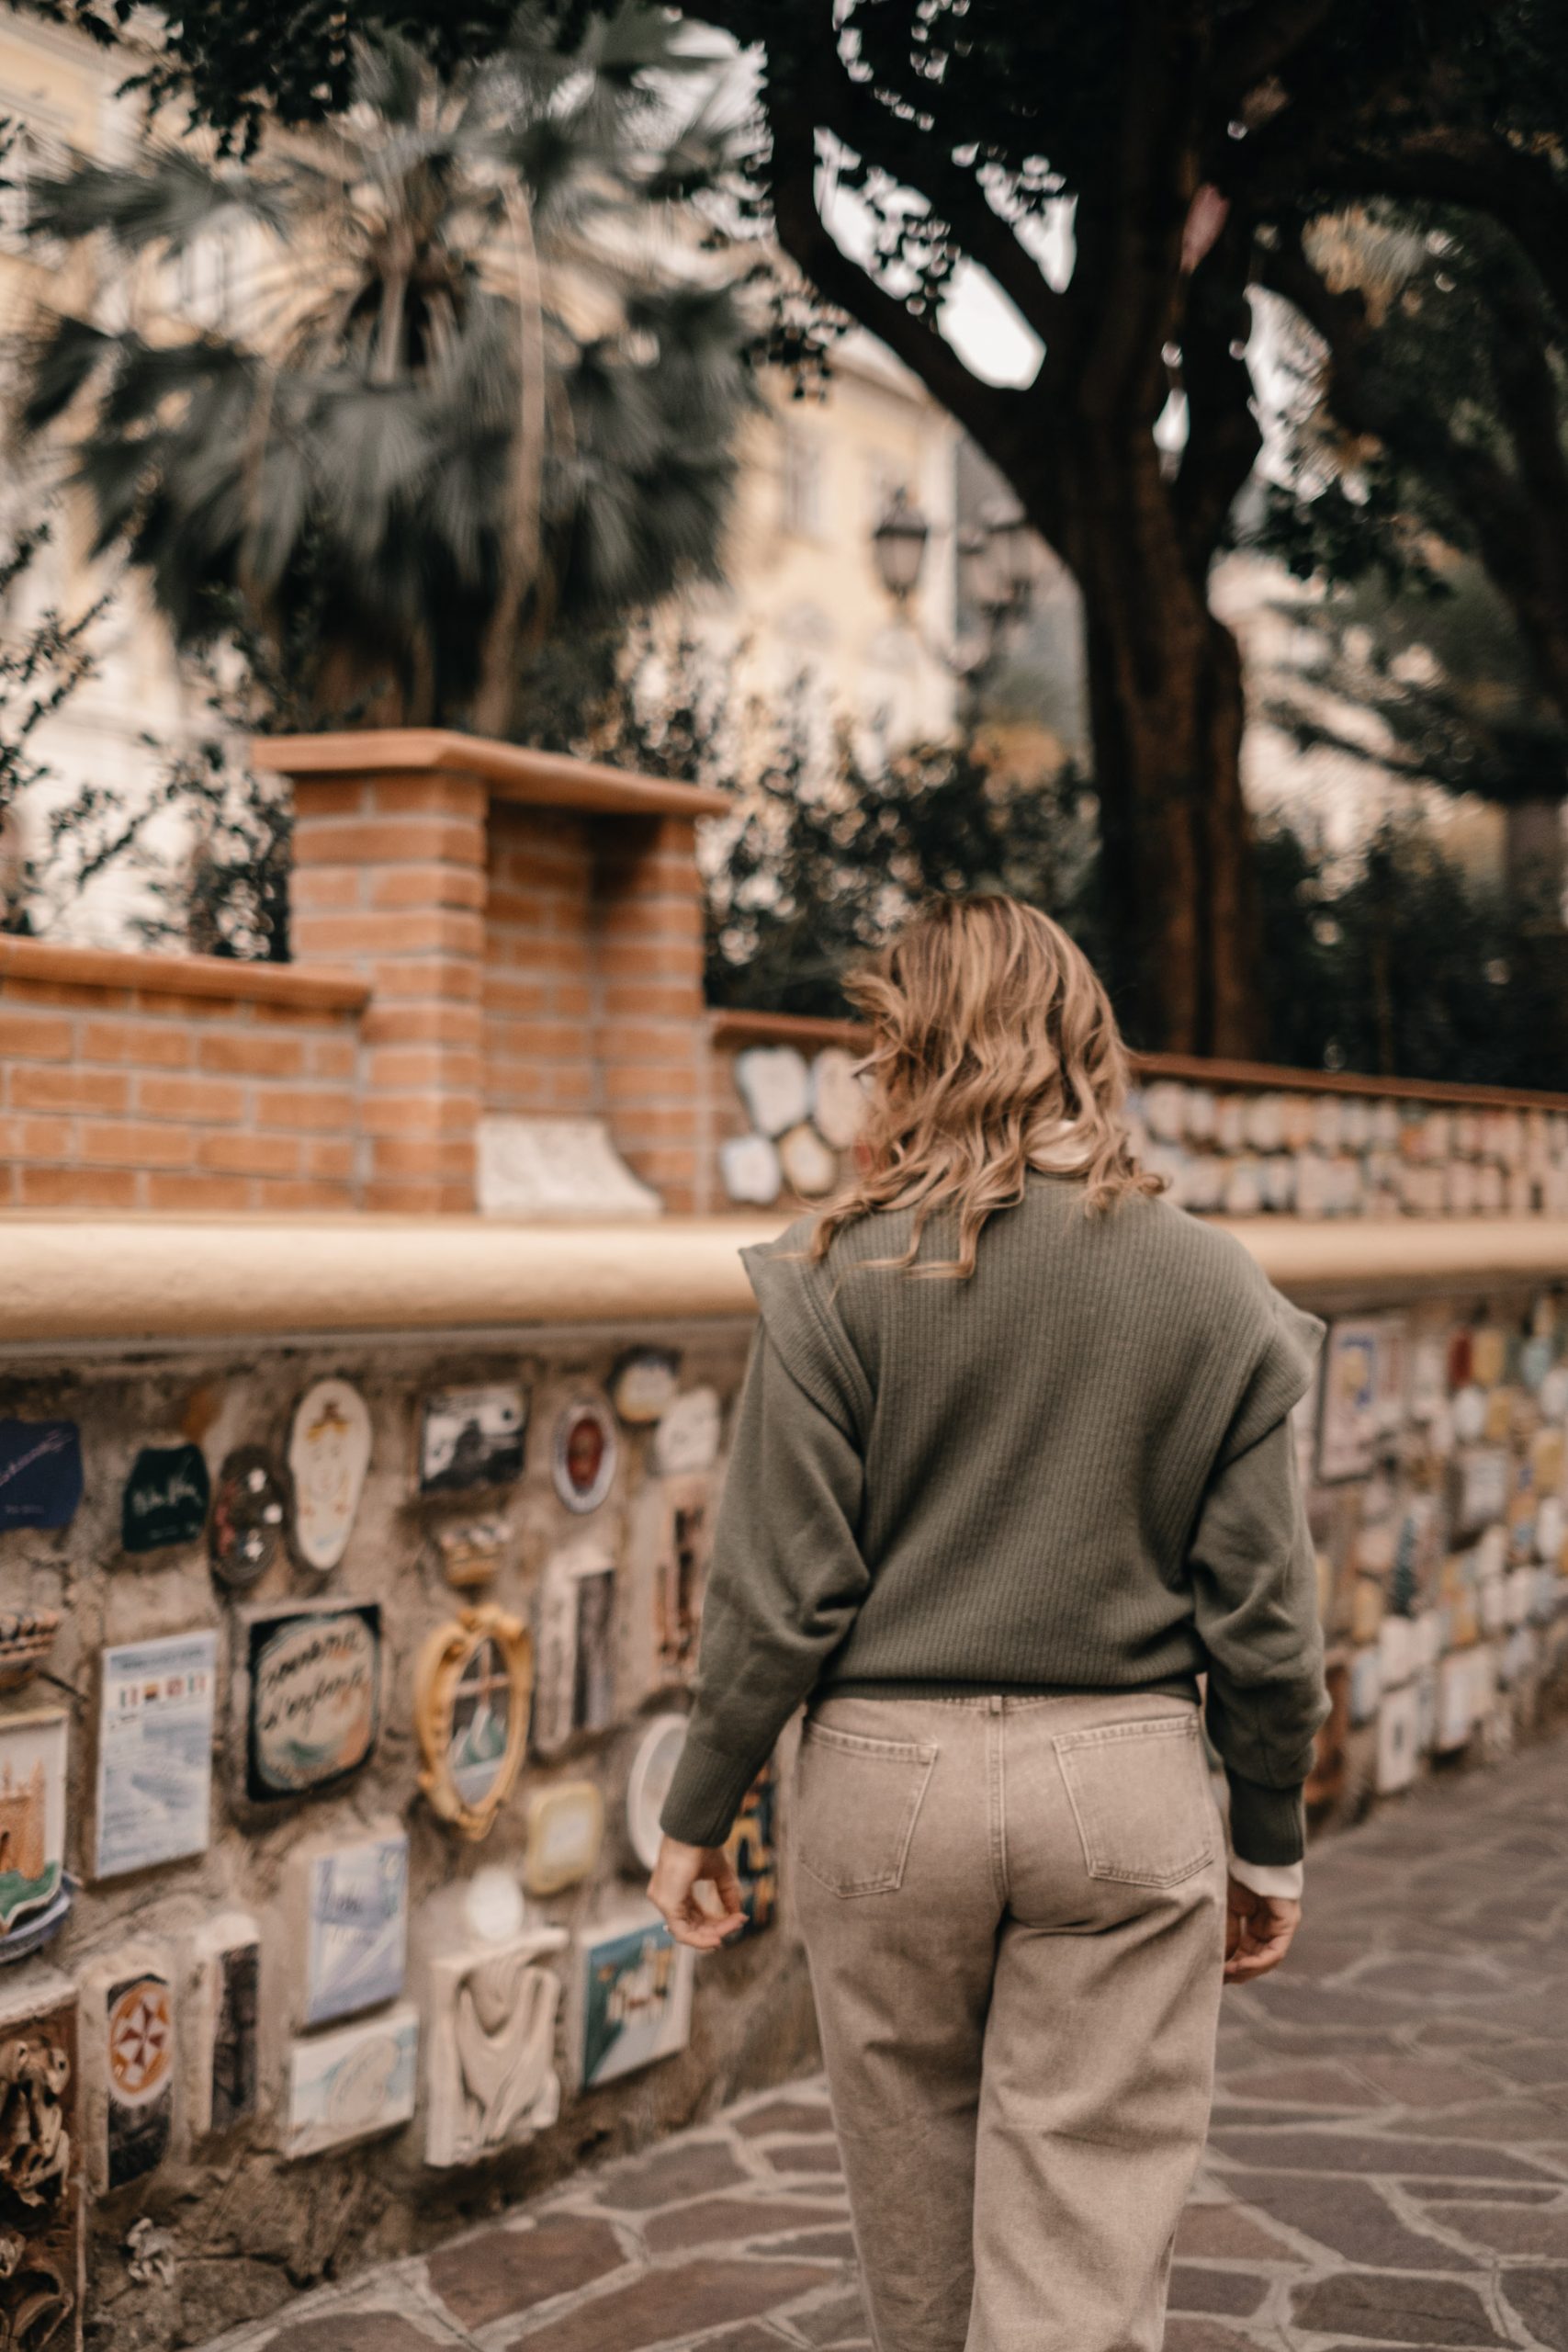 Floriana, founder of Vayadù, while walking in front of the signed tiles of Muretto in Alassio